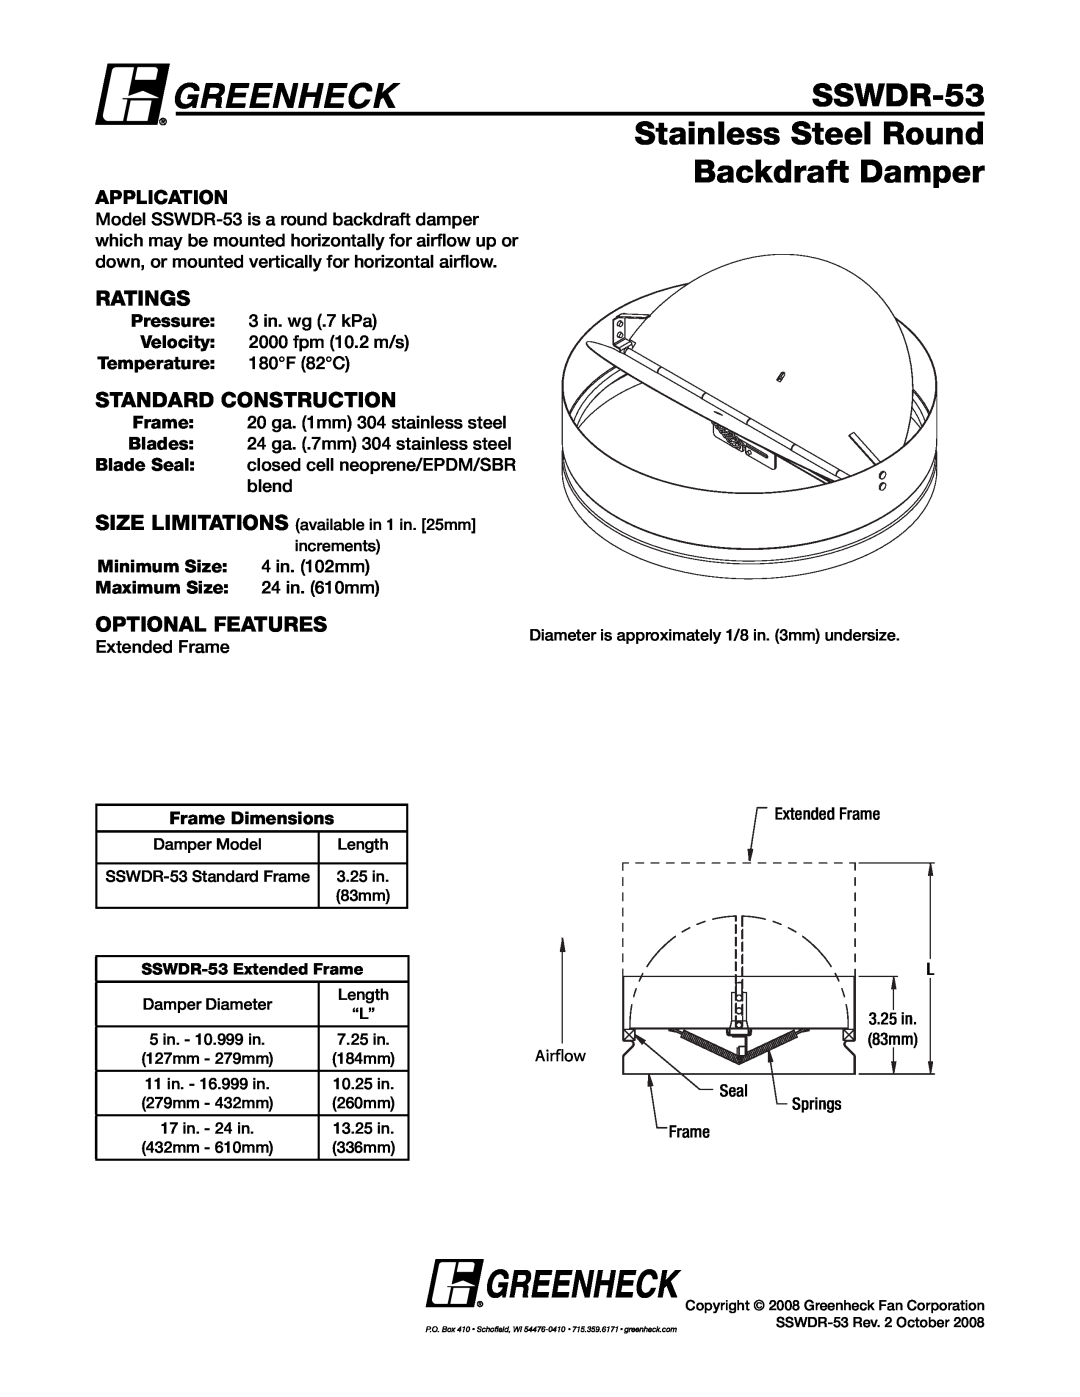 Greenheck Fan dimensions SSWDR-53 Stainless Steel Round Backdraft Damper, Ratings, Standard Construction, Application 